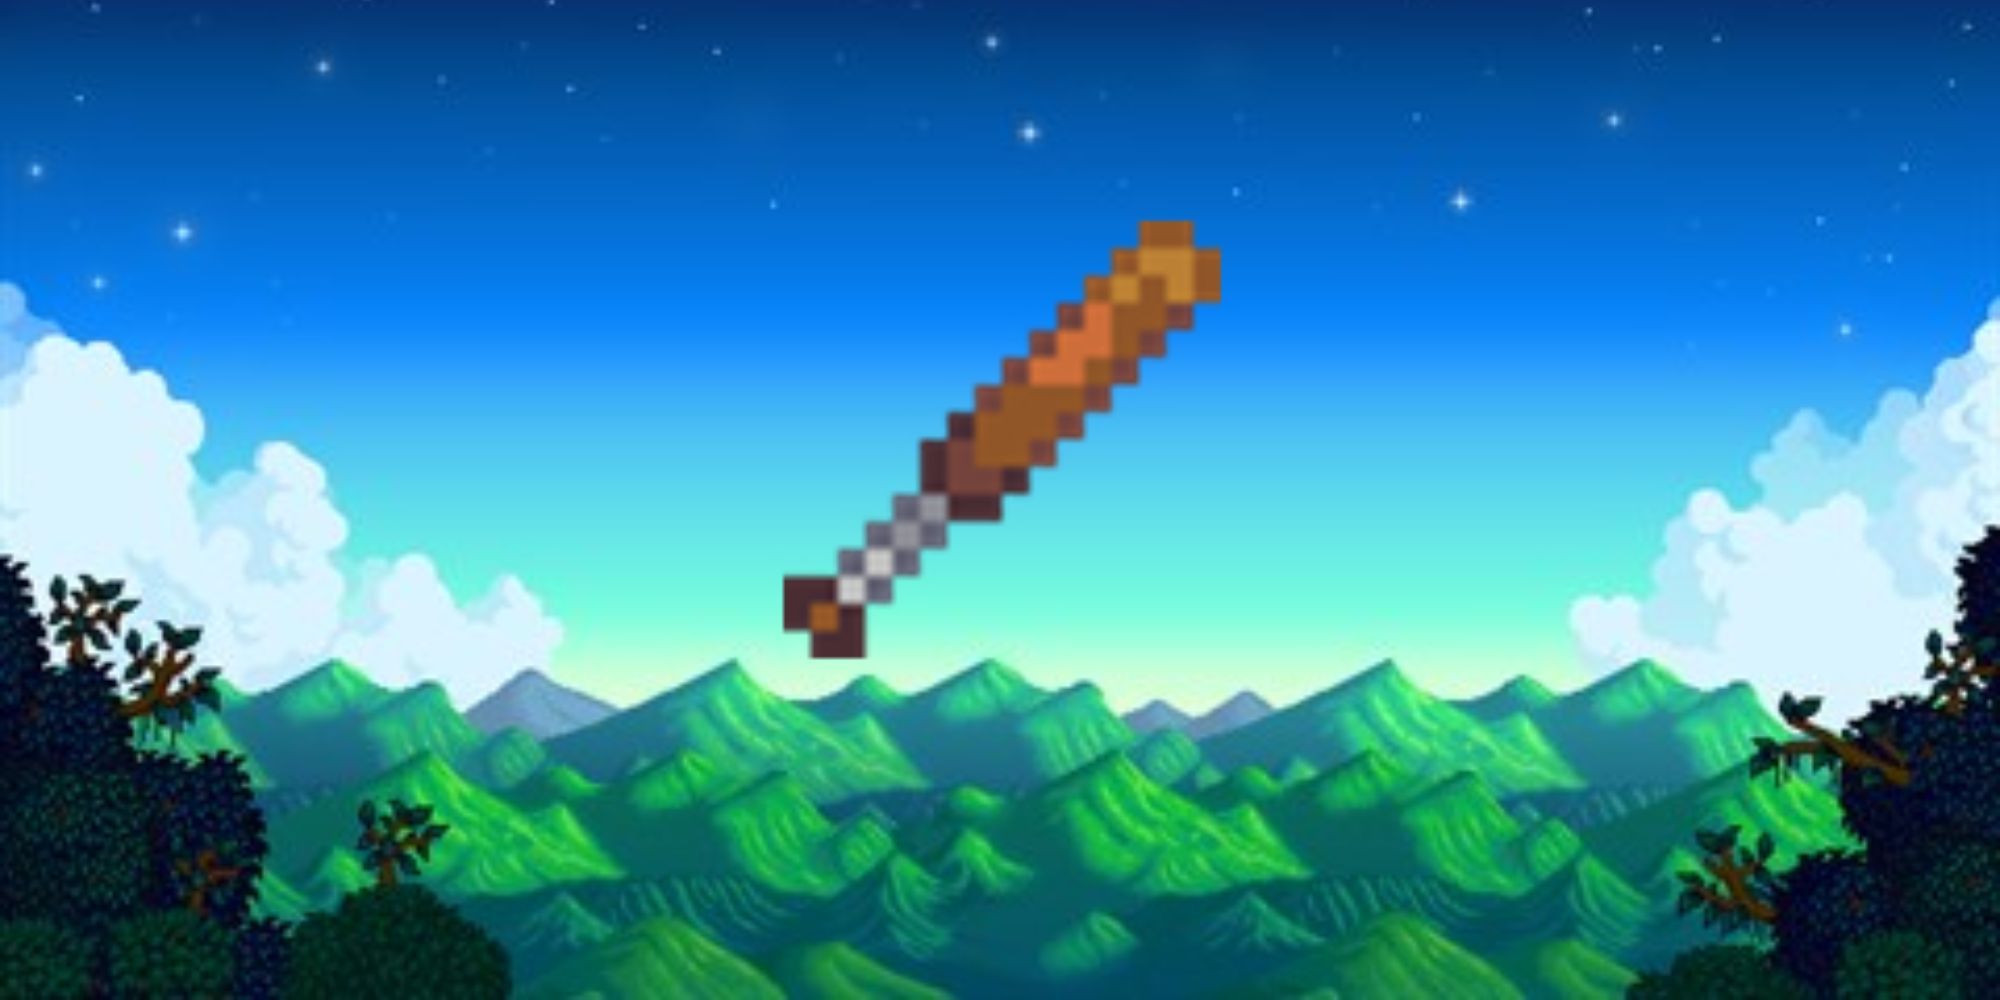 Alex from Stardew Valley's Bat, a normal looking wooden bat with cloth on the stem